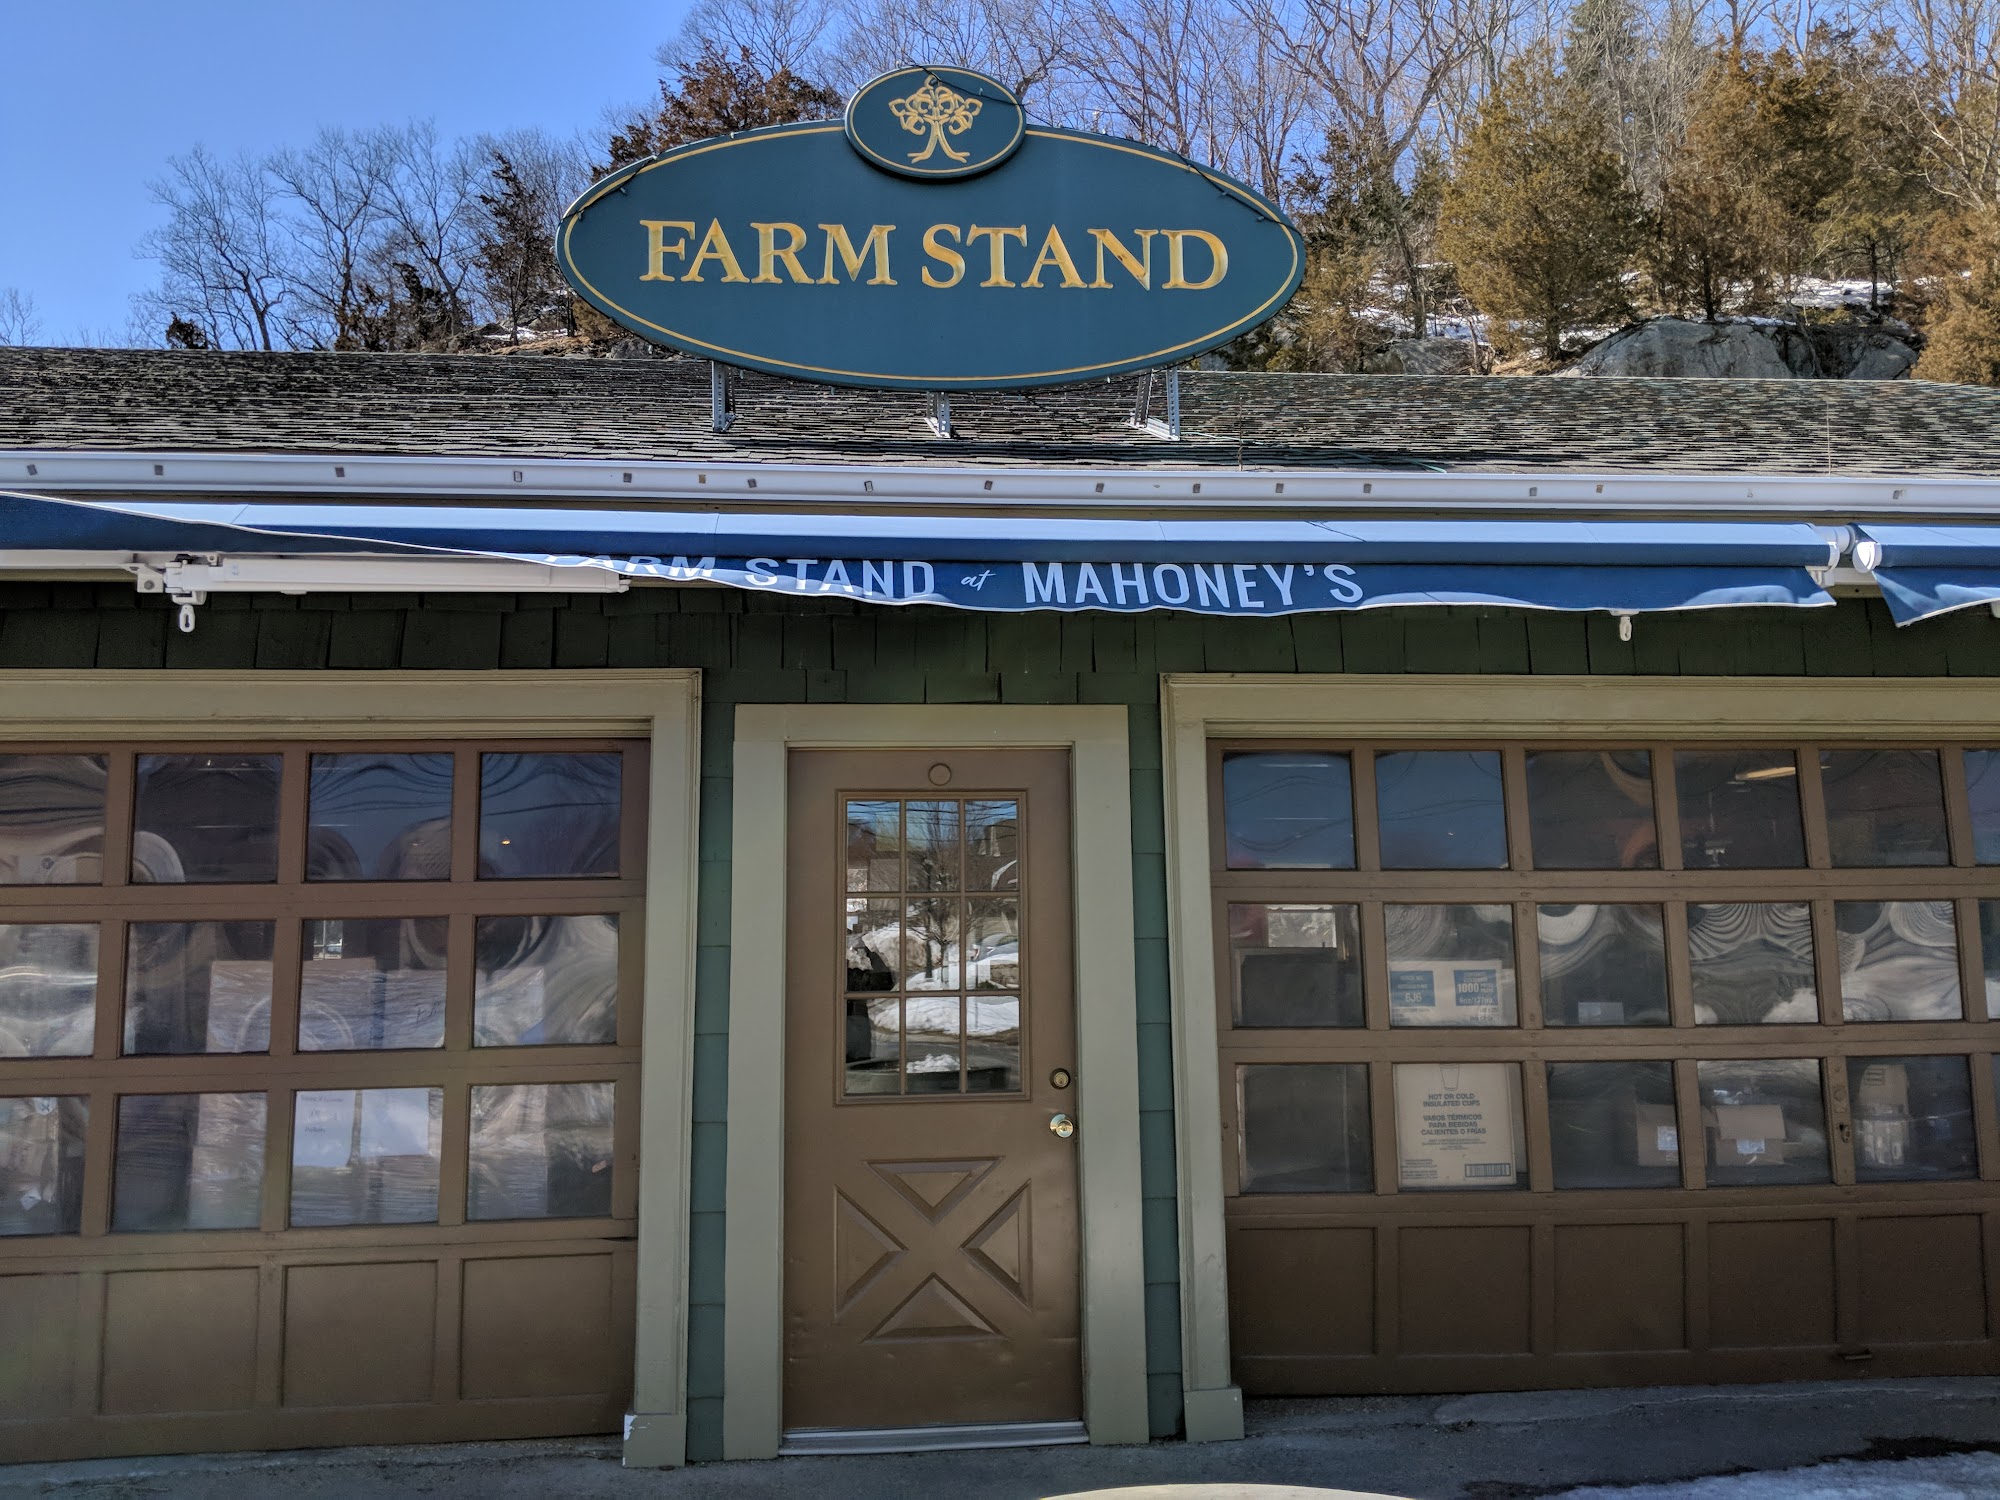 The Farmstand at Mahoney's